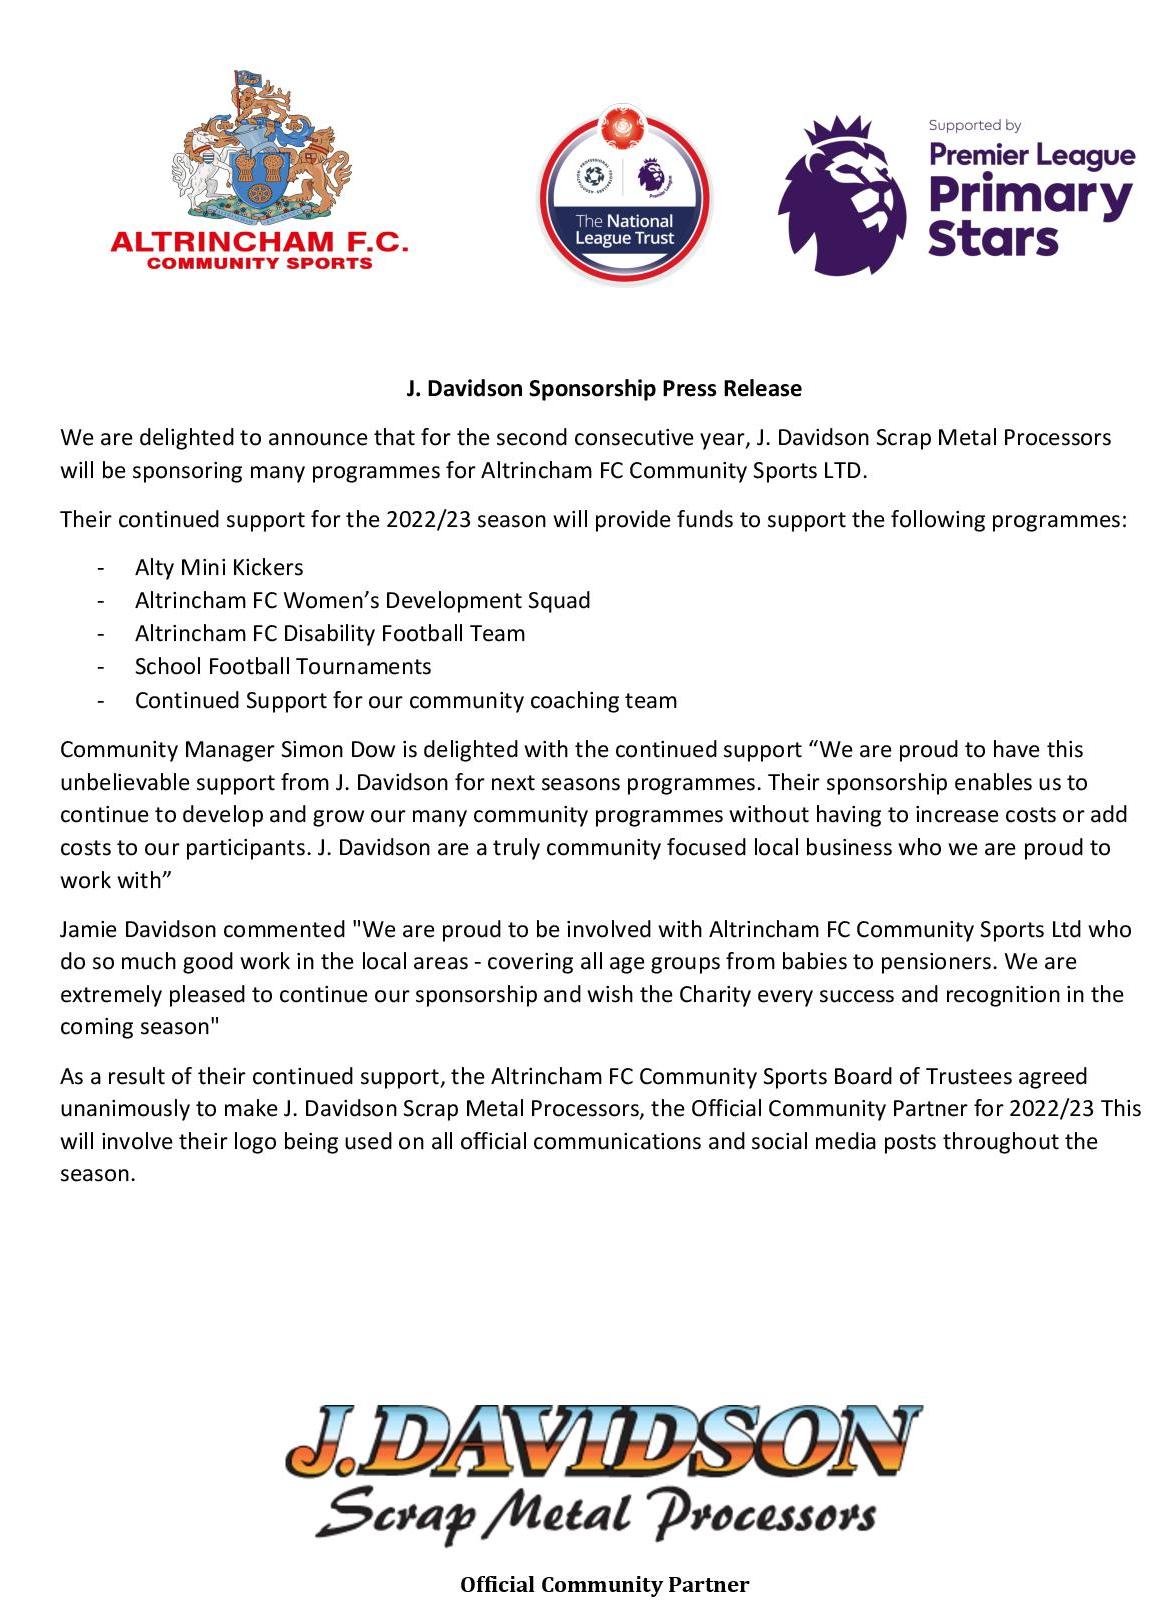 Official Altrincham Community Sports Partners for 2022/23 - J